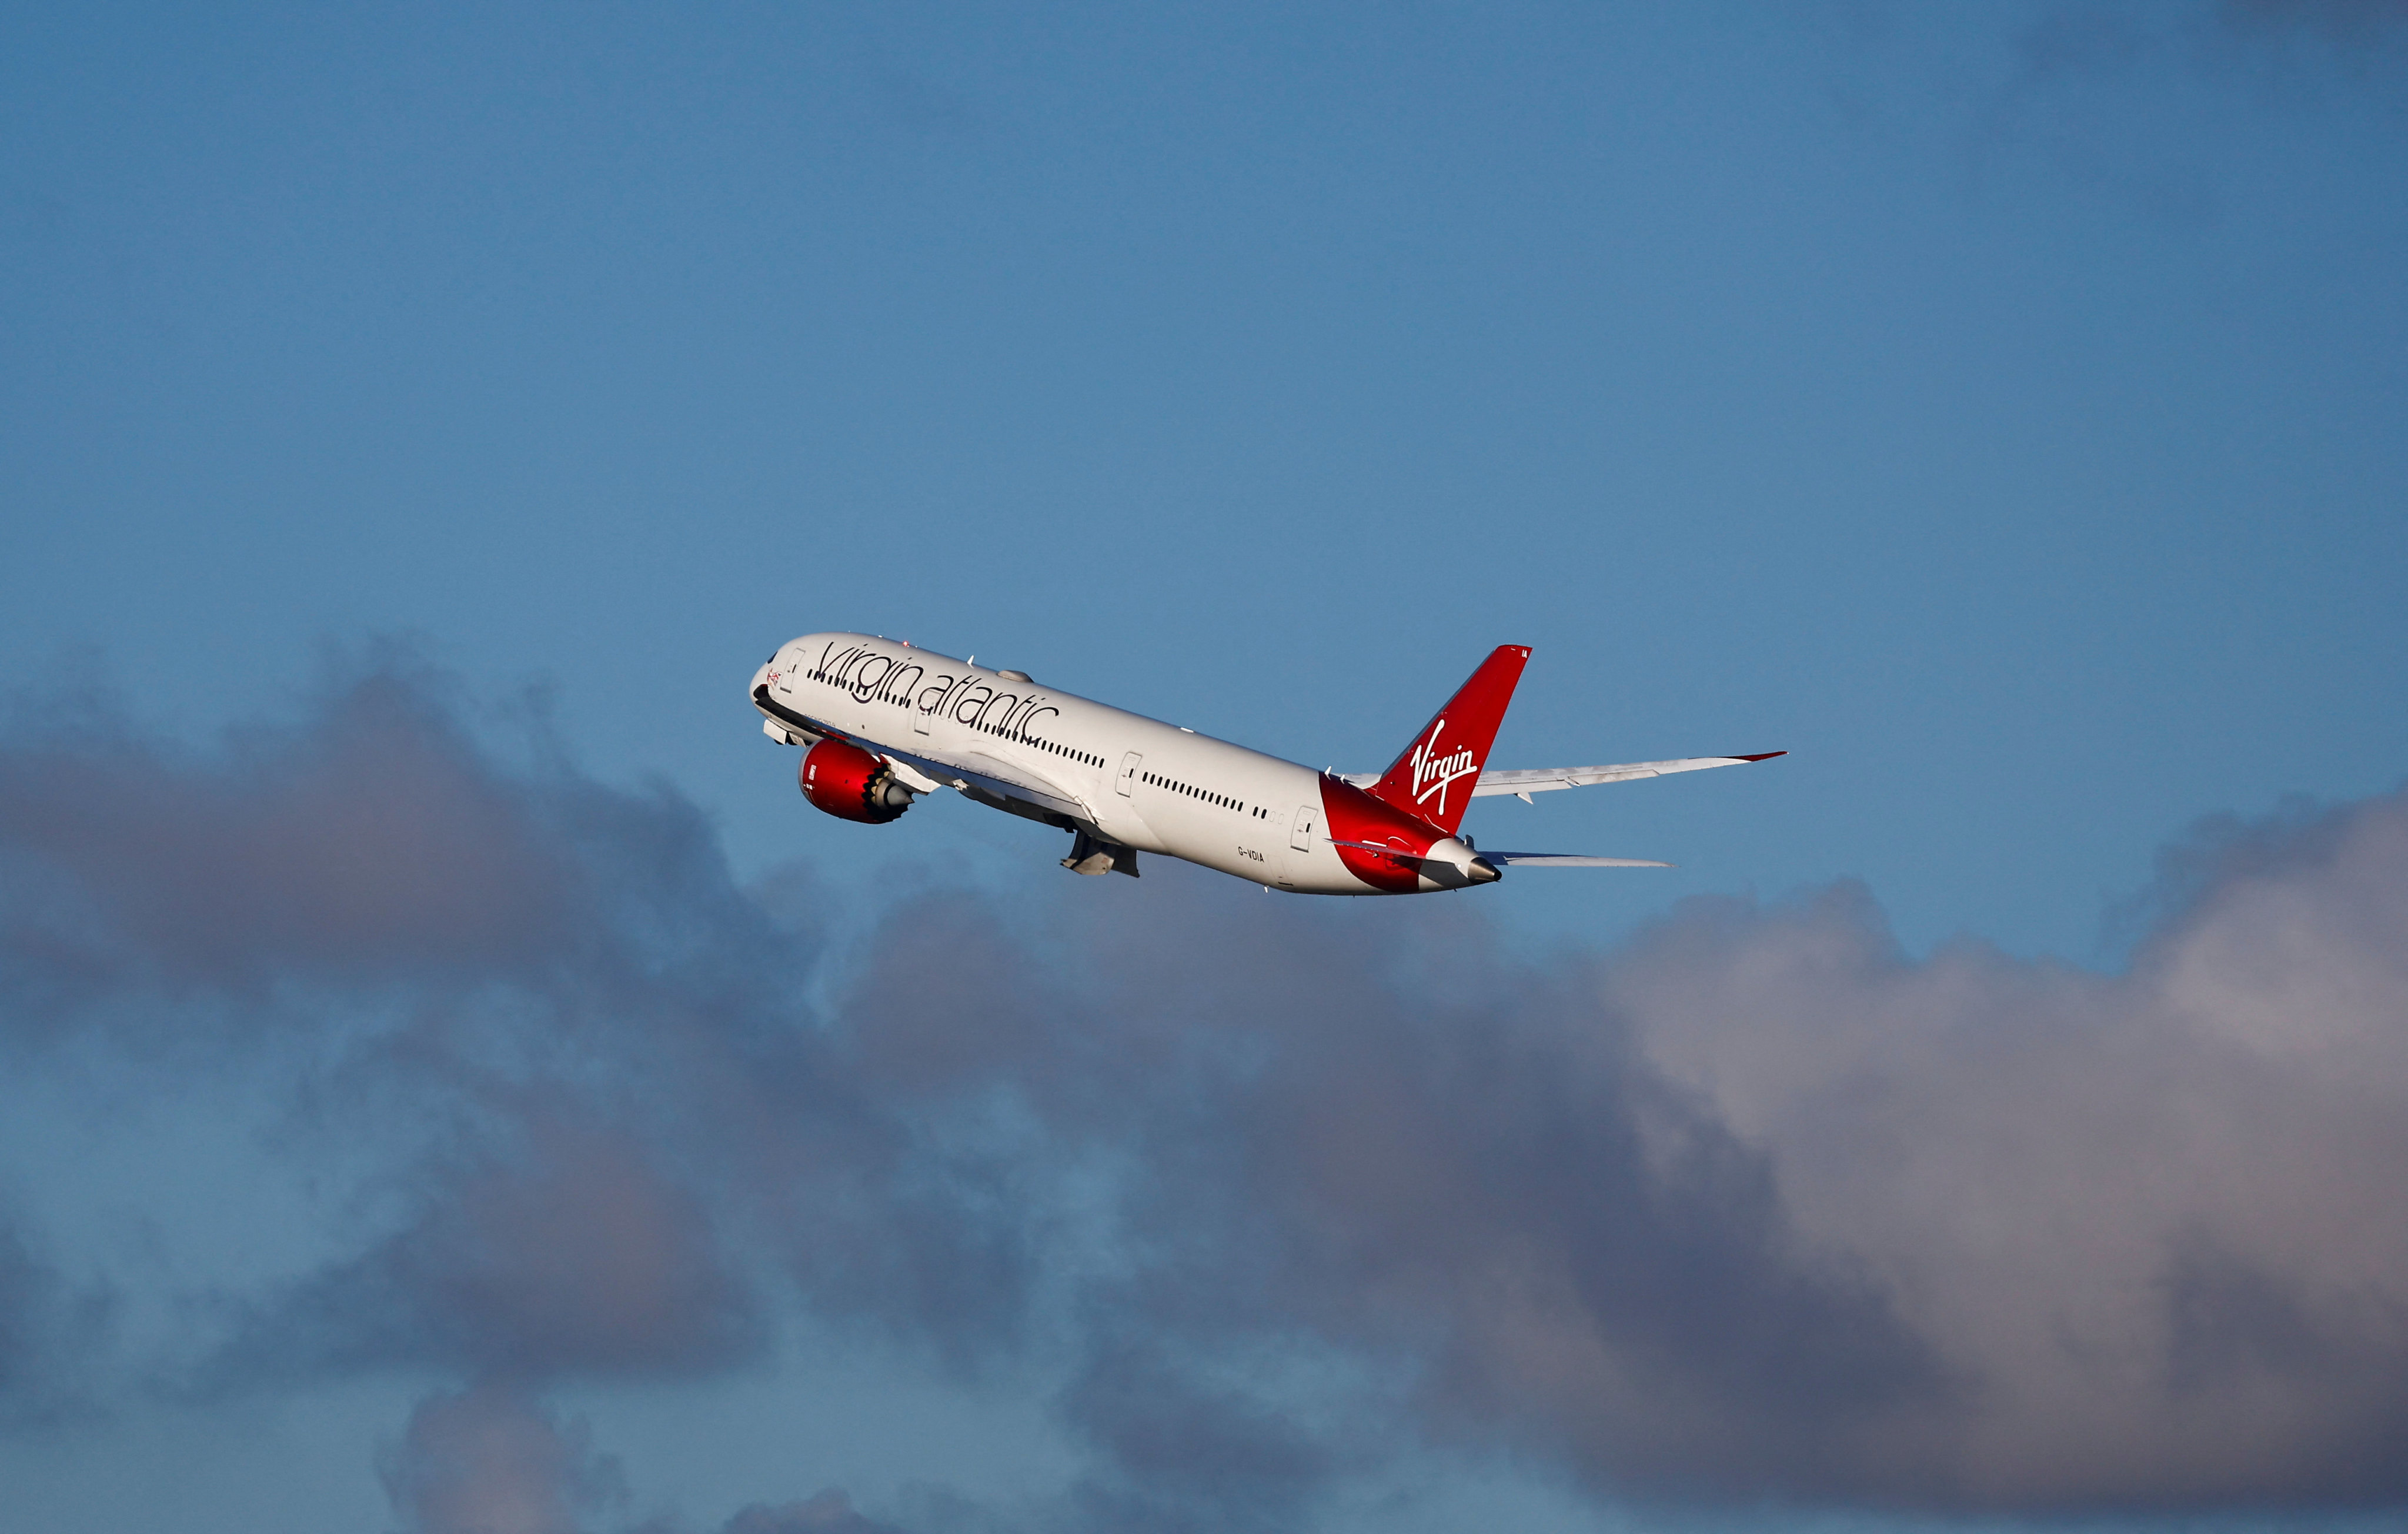 The Virgin Atlantic Boeing 787 was powered without using fossil fuels. Photo: Reuters